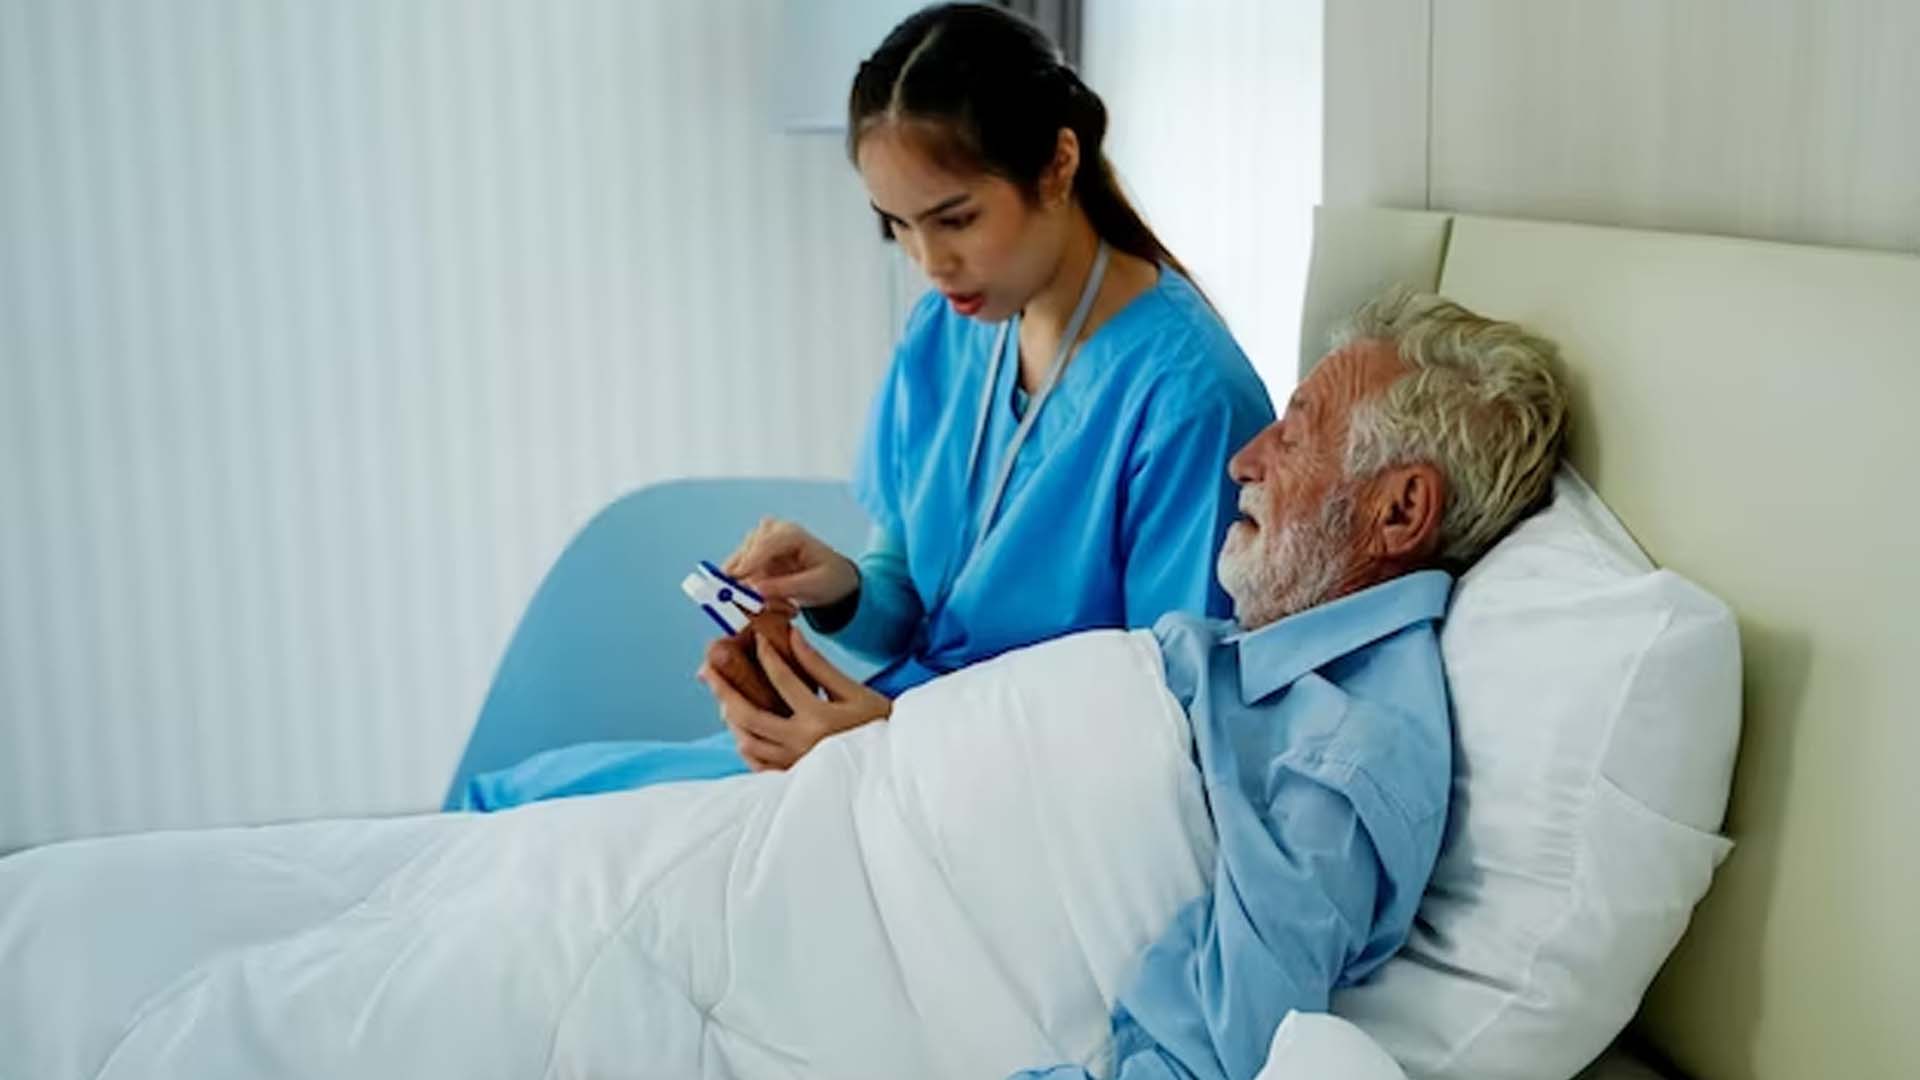 Nurse uses a heart rate monitor elderly patient check the heartbeat check